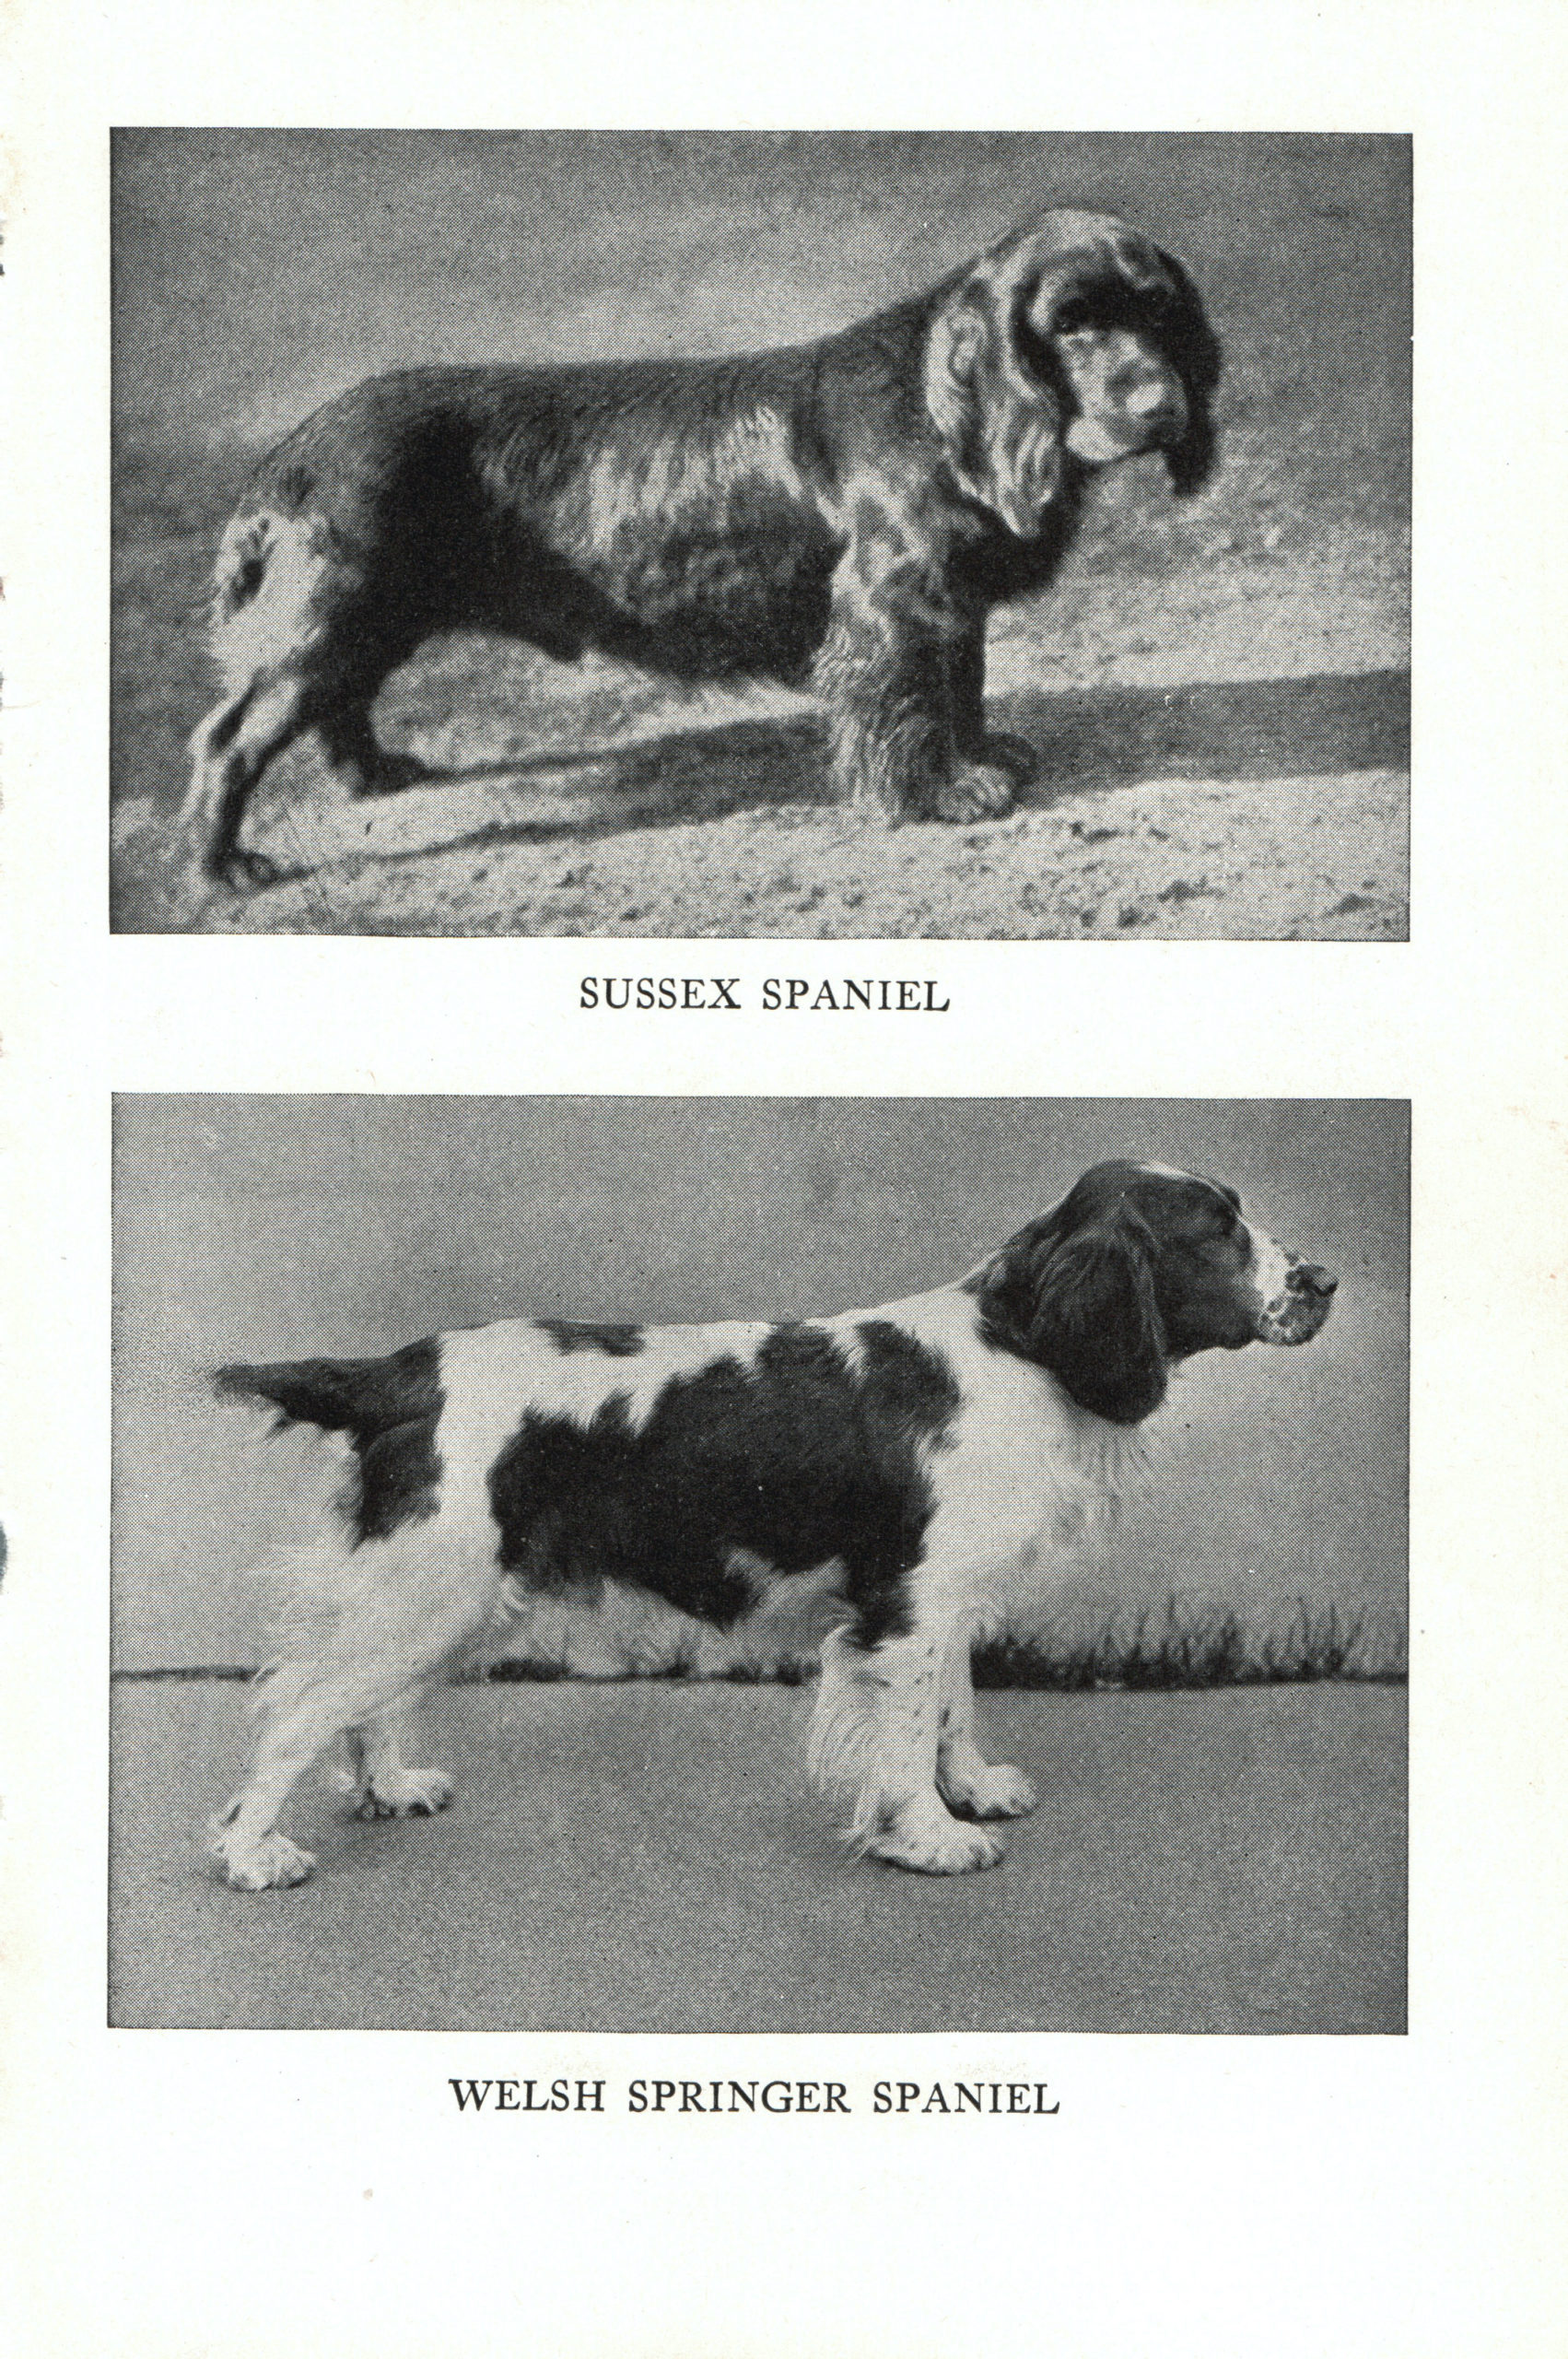 1947 Complete Dog Sussex Spaniel And Welsh Springer Spaniel On One Side And Ebay